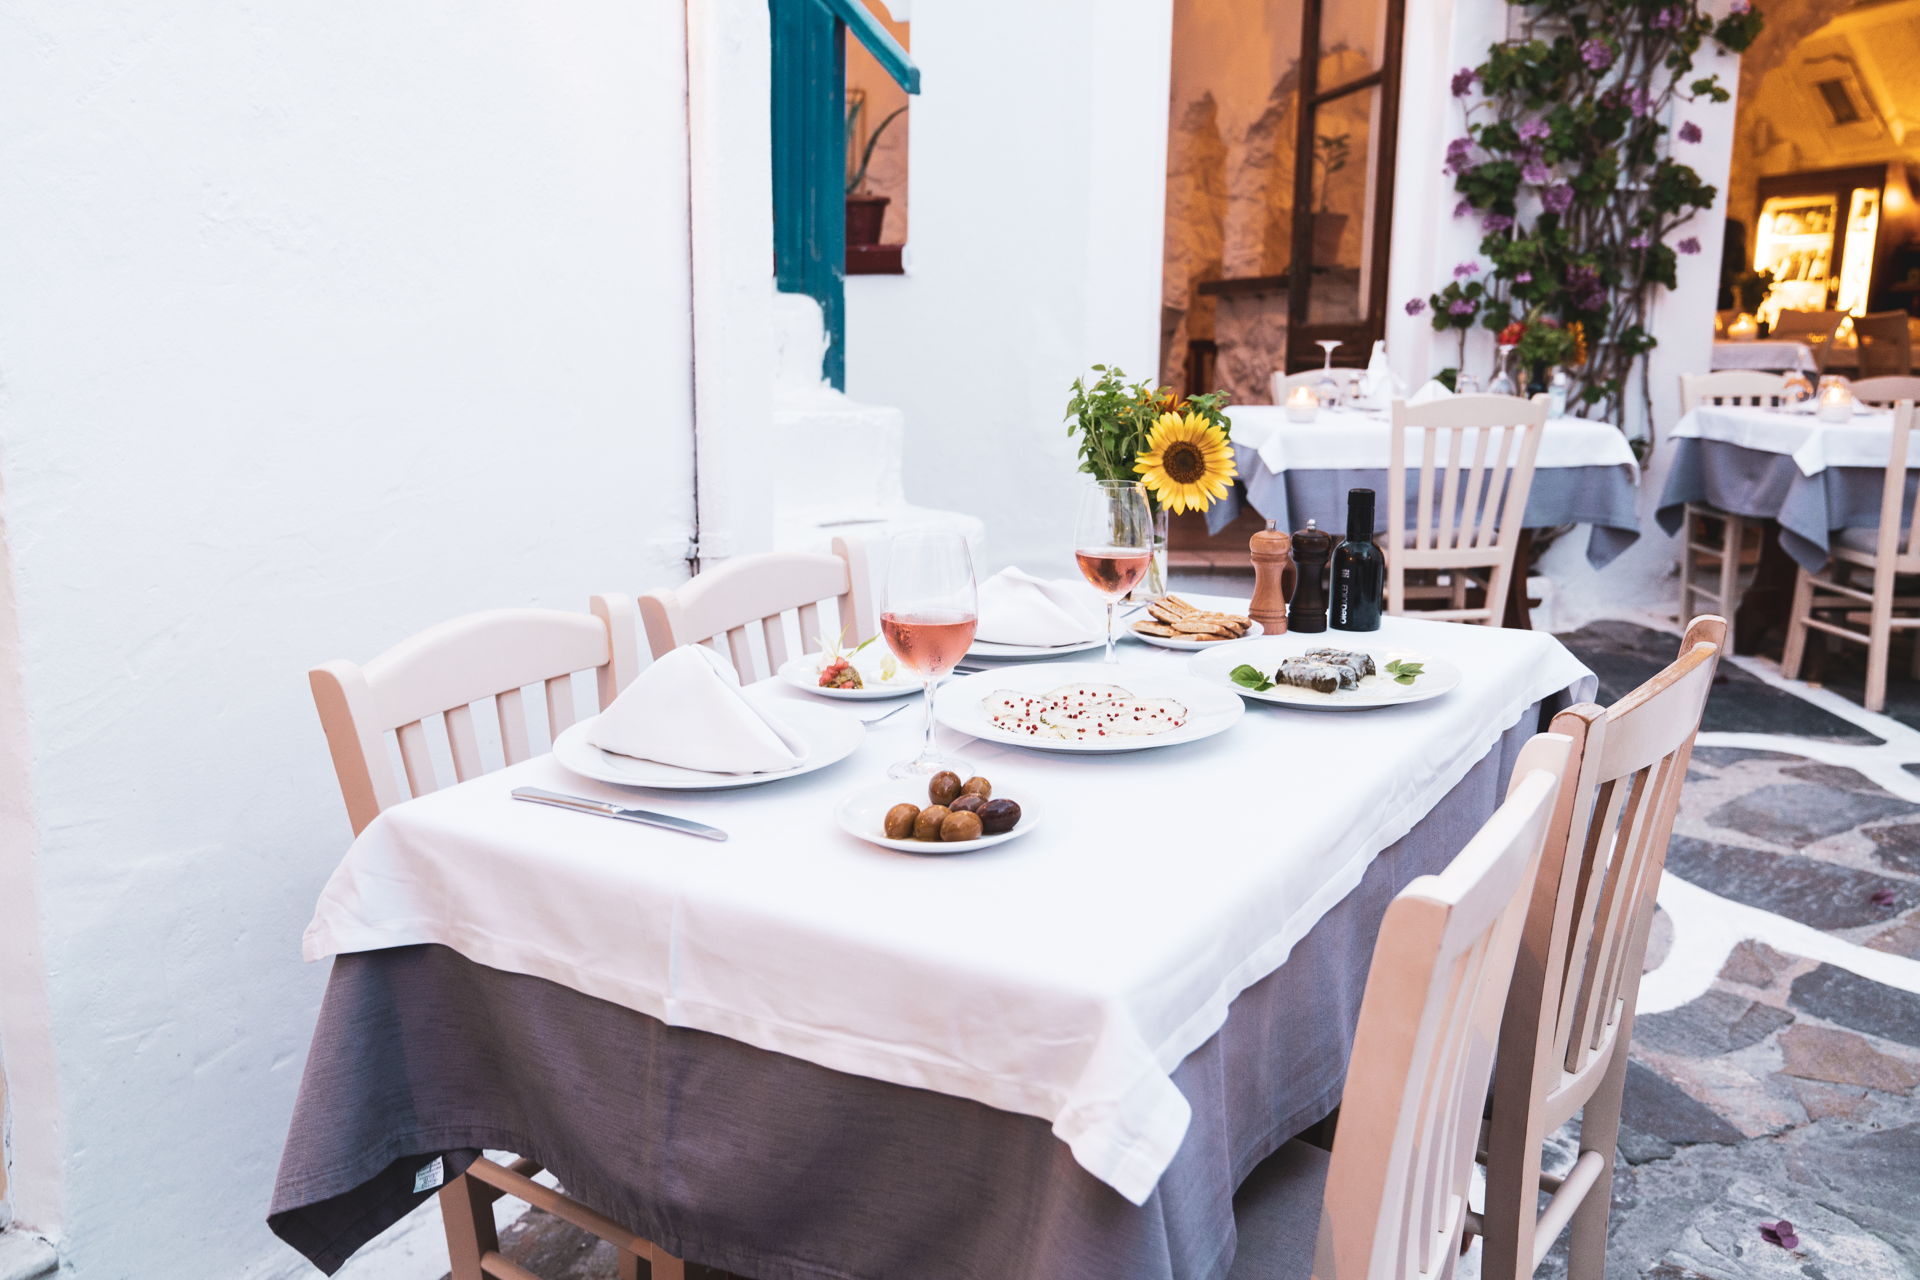 Strolling in Hora you will find plenty dining options for every taste.